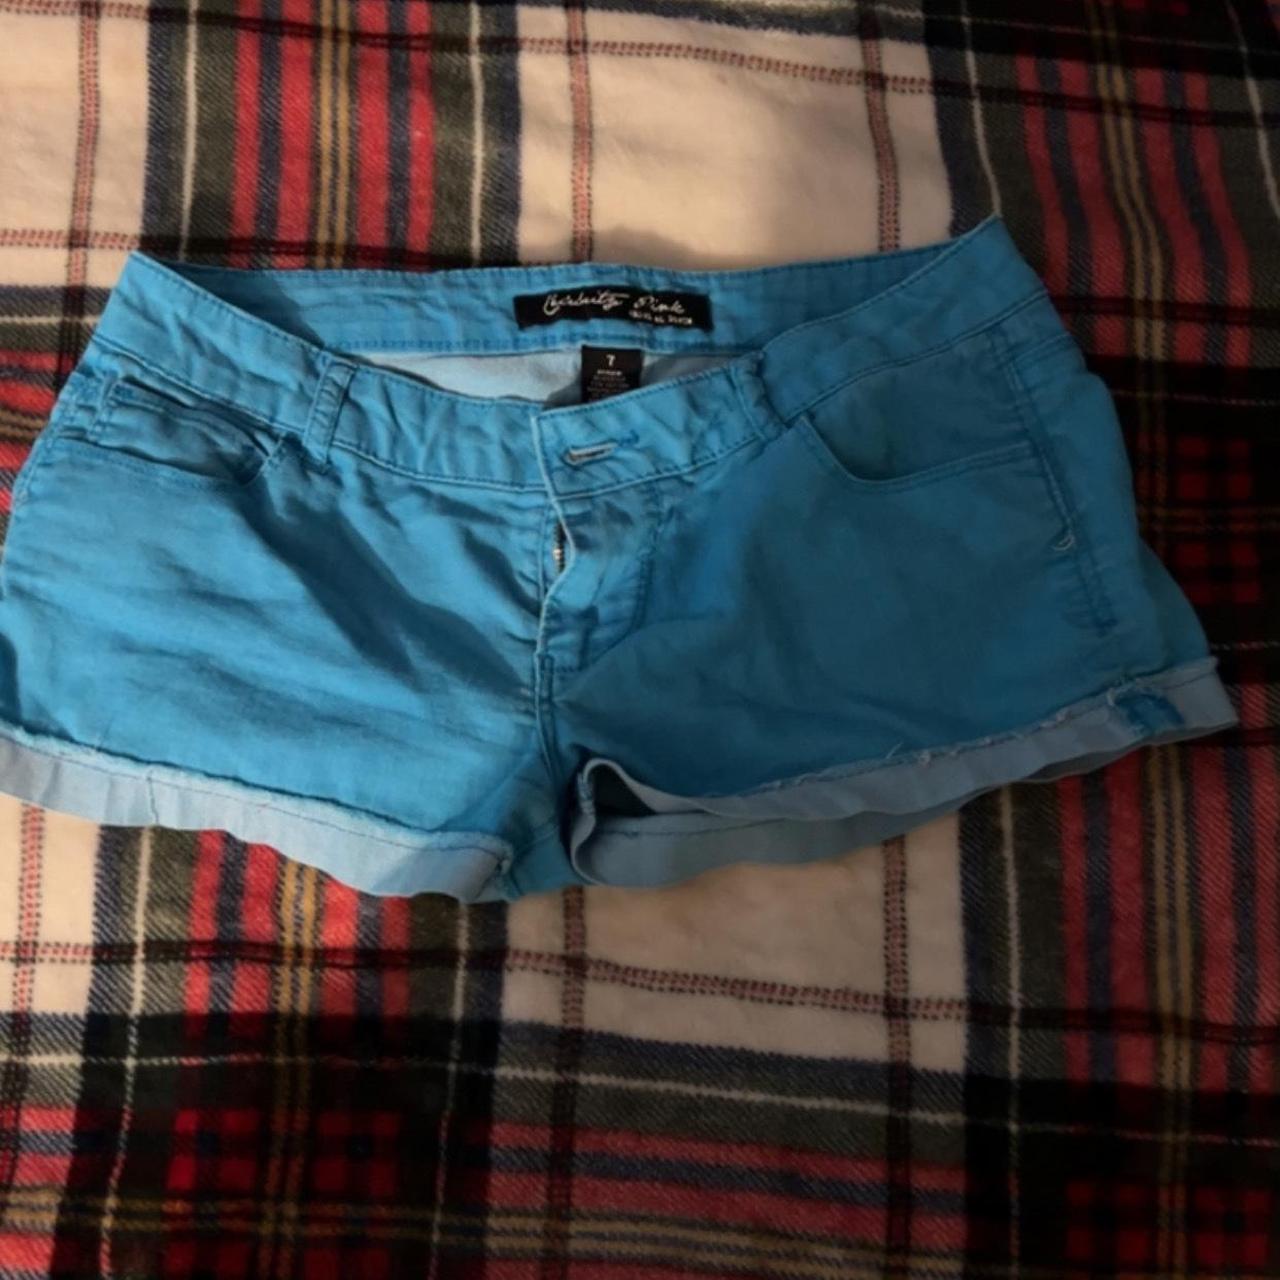 Xs booty shorts, never have been worn. Cute style - Depop